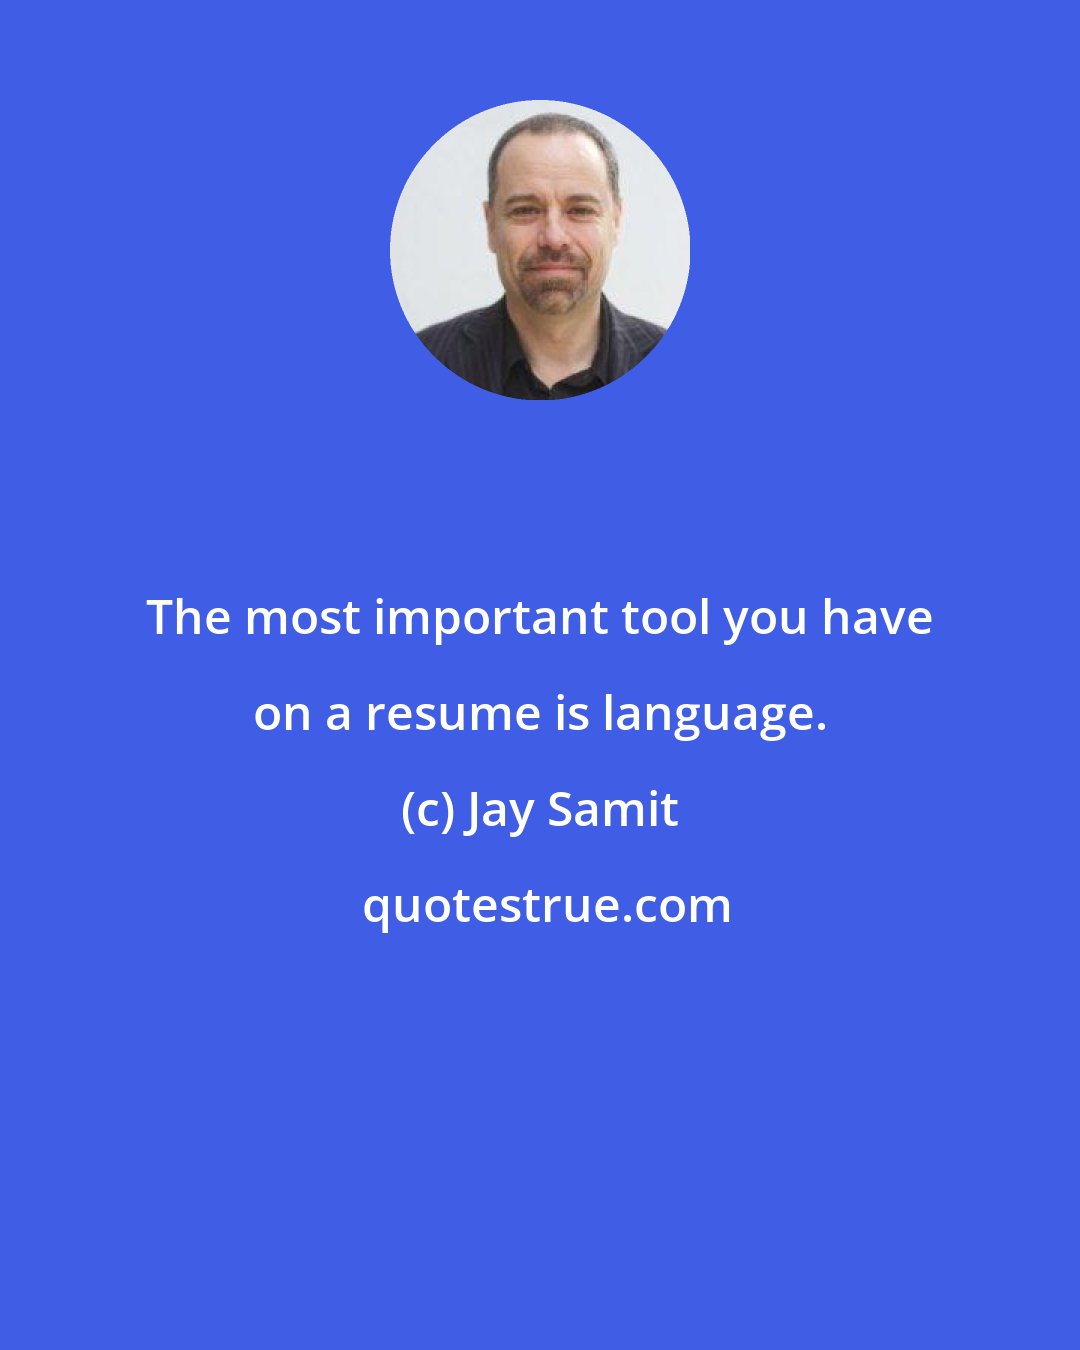 Jay Samit: The most important tool you have on a resume is language.